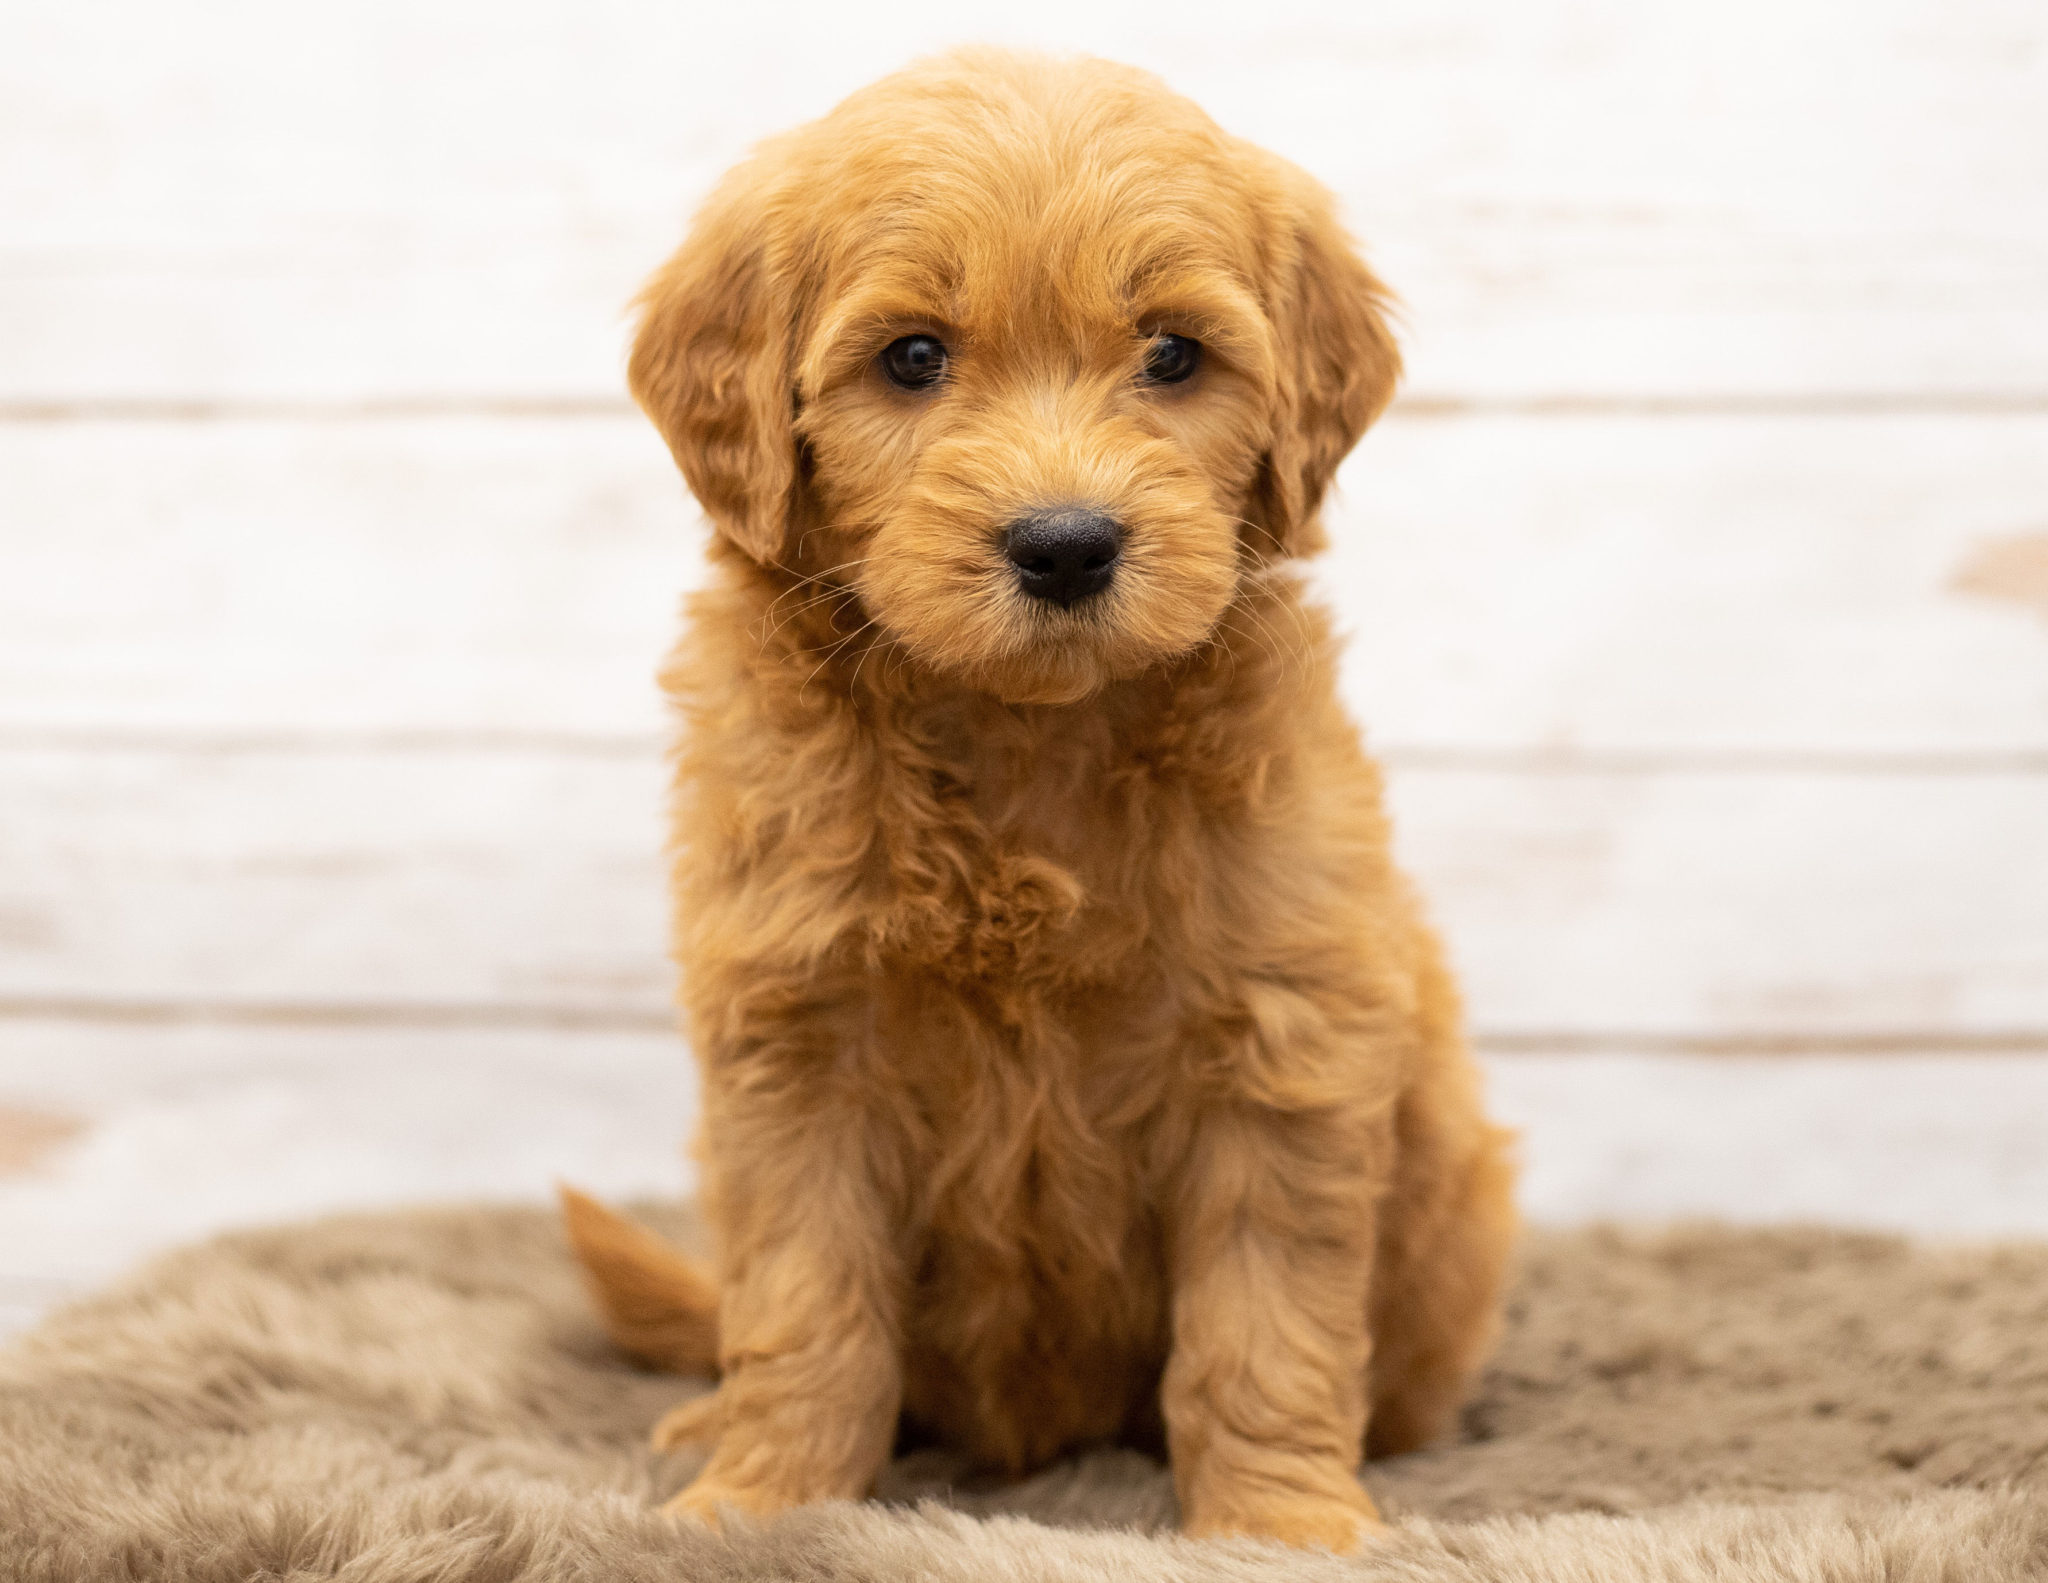 Goldendoodle Puppies For Sale In Iowa | Poodles 2 Doodles